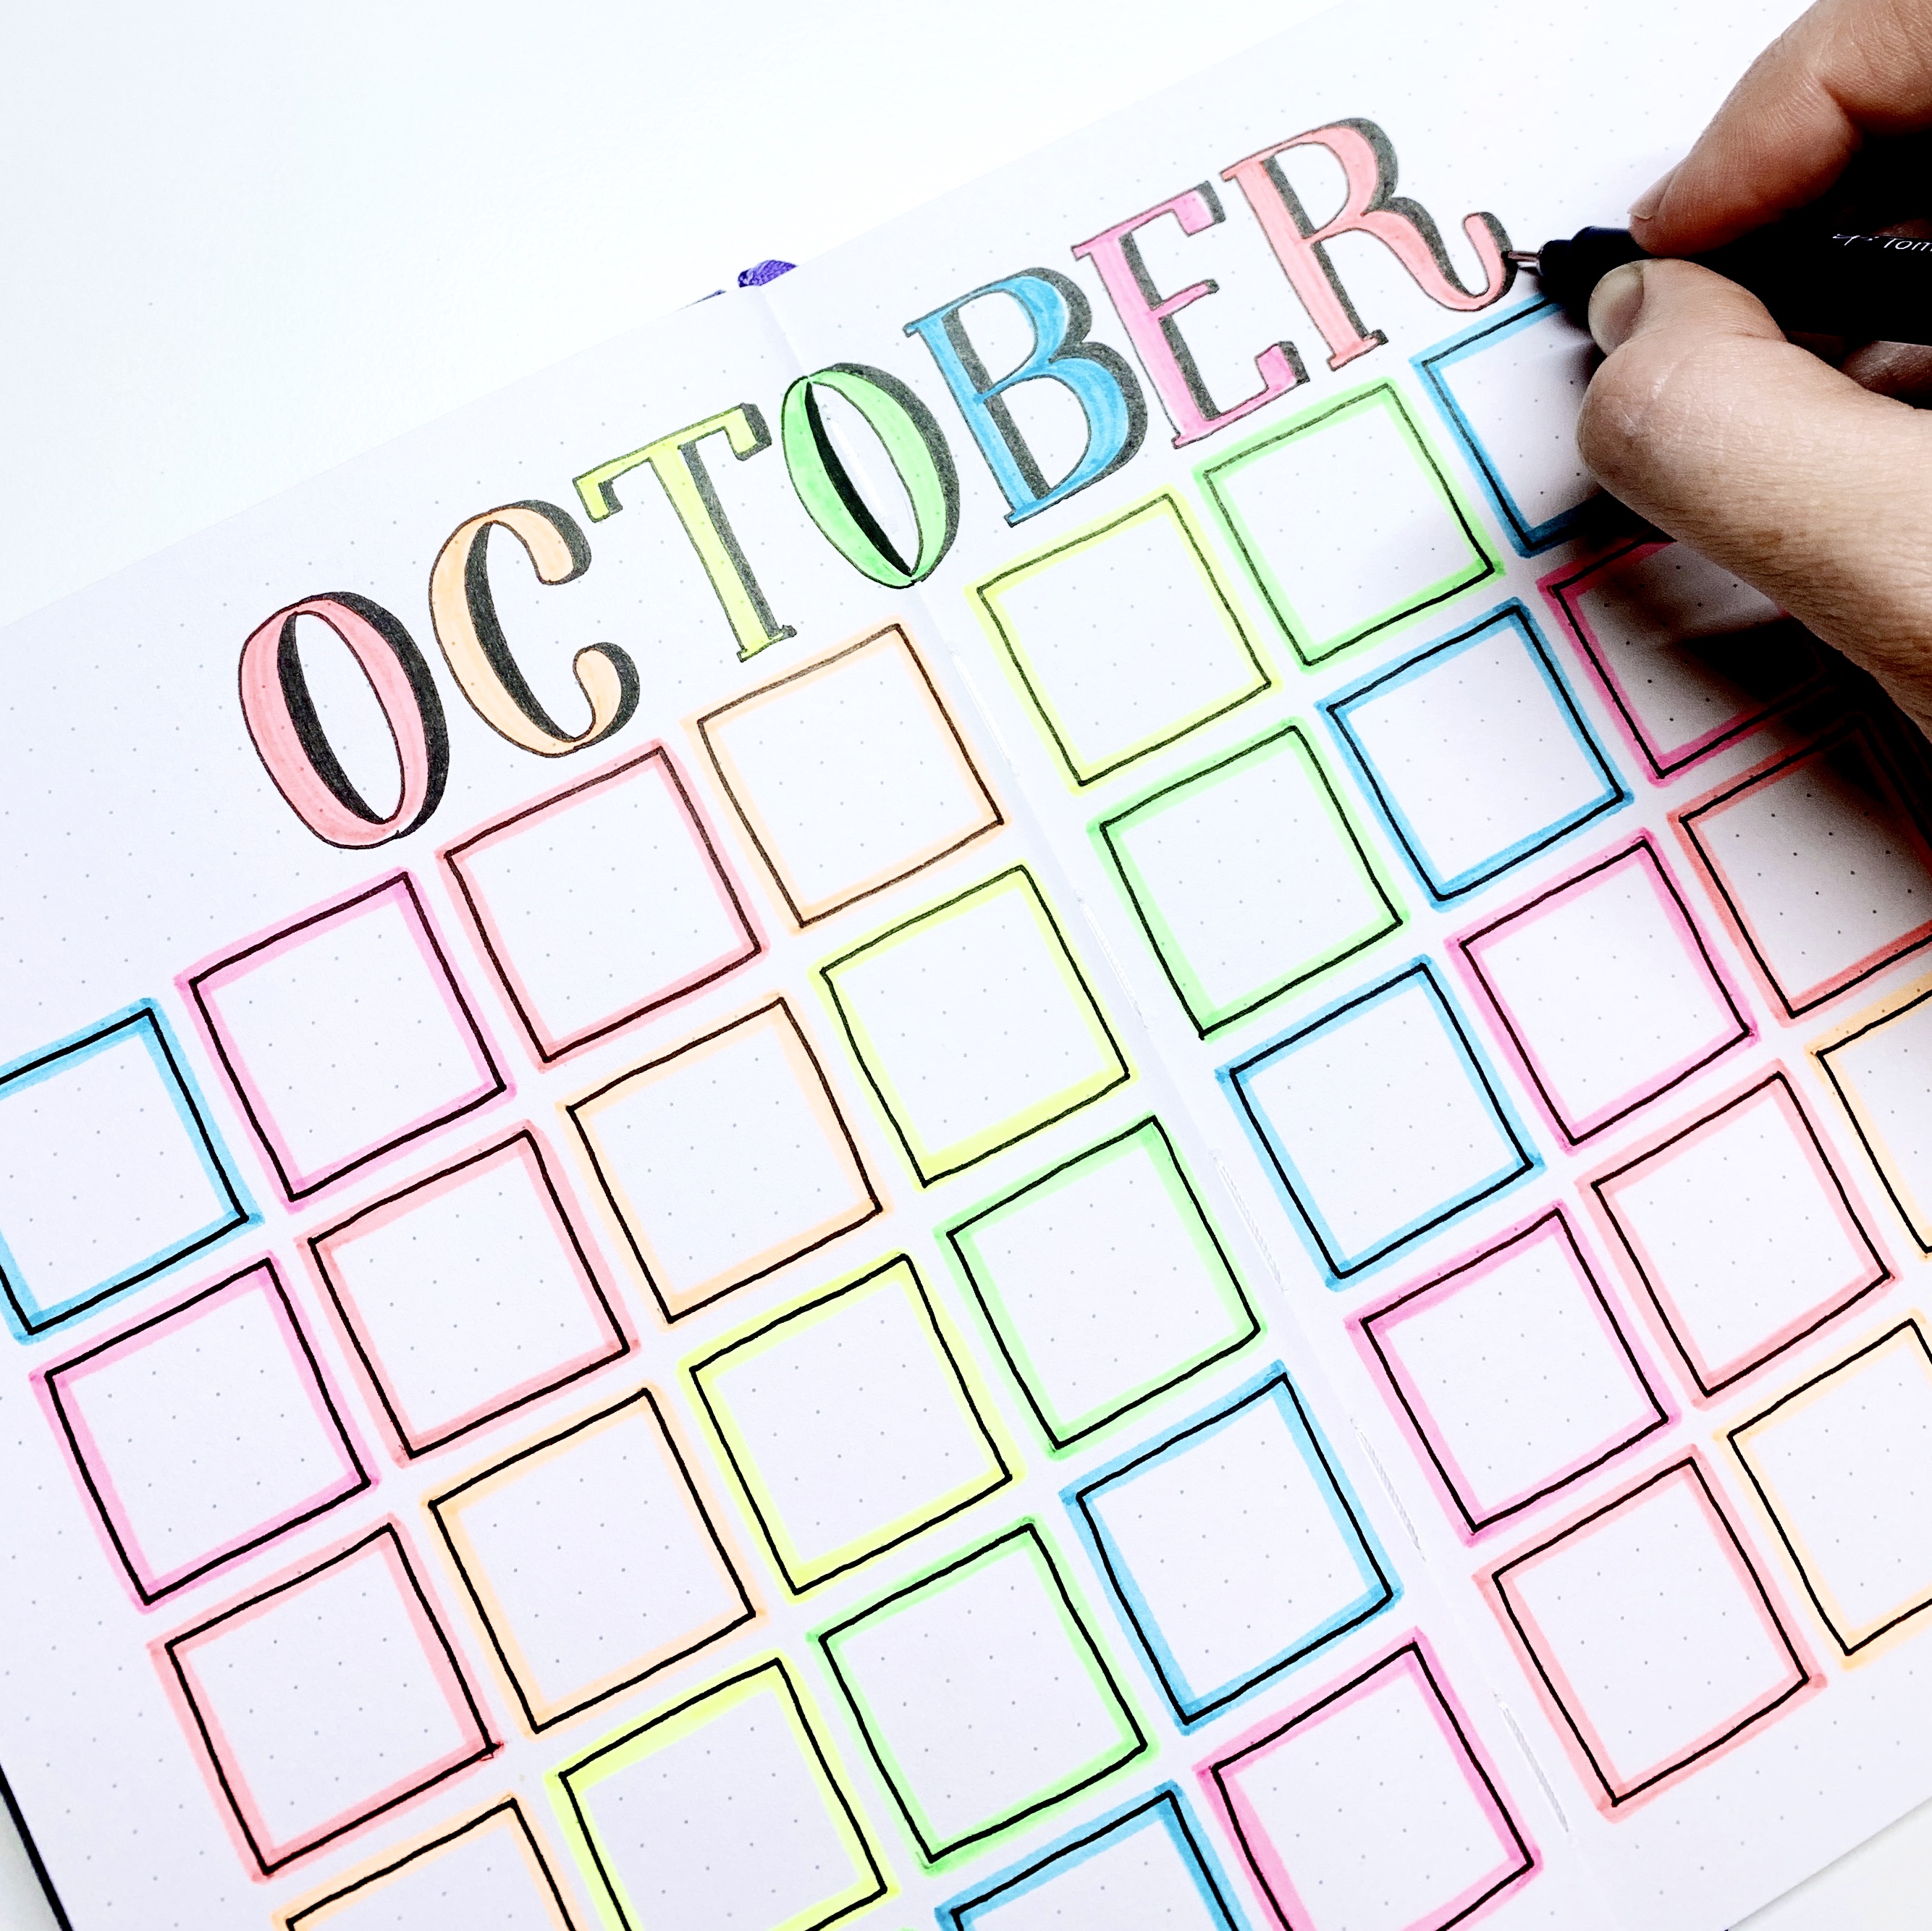 Create an October Calendar Spread using the NEW Tombow Fudenosuke Neon Brush Pens with Adrienne from @studio80design!